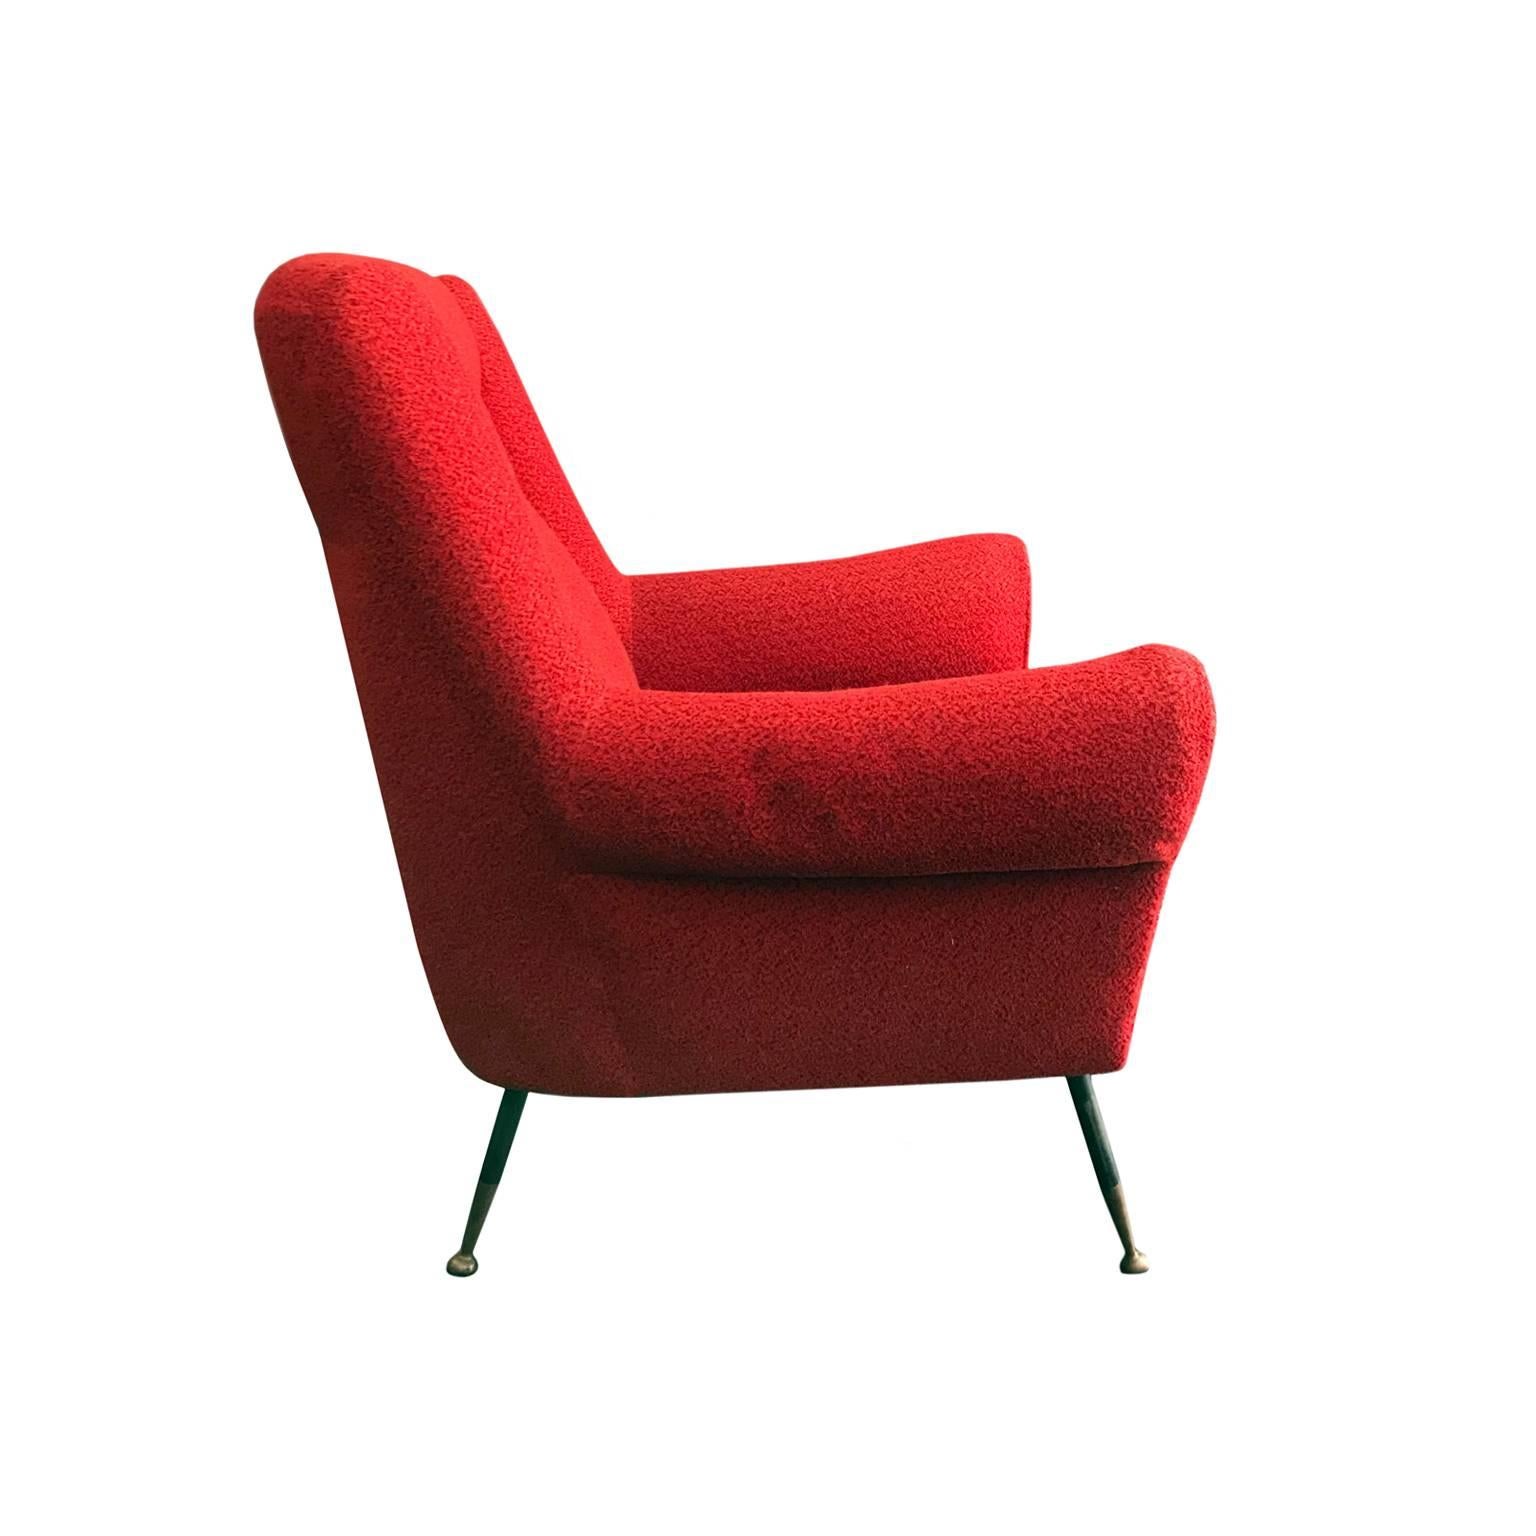 Midcentury rolled armchair in original red boucle with iron legs and brass sabots, Italy, 1950s.

Pair available, priced individually.